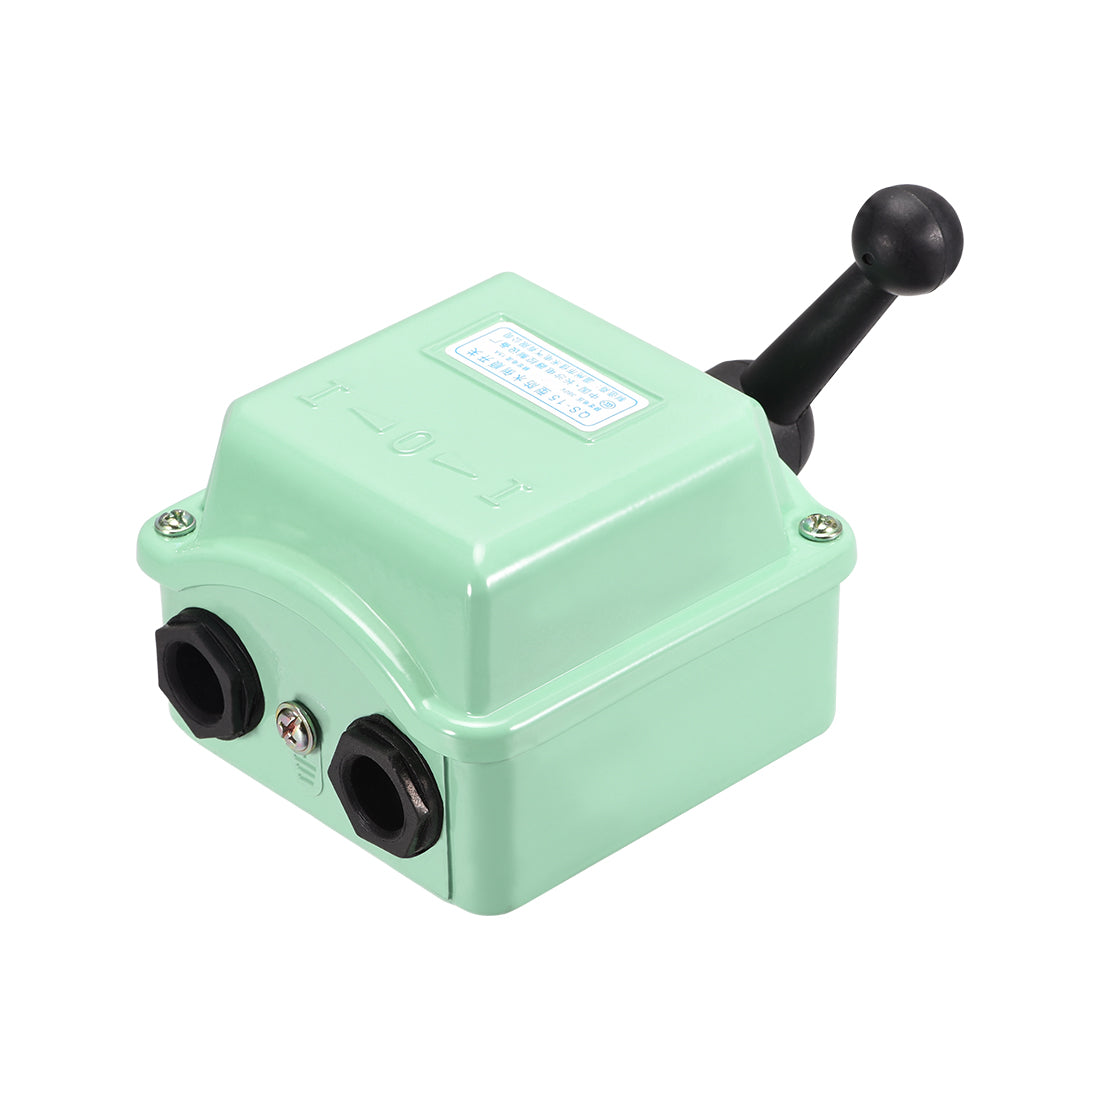 uxcell Uxcell Drum Switch QS-15 3 Positon Forward/Off/Reverse Motor Control Aluminum Shell 15A